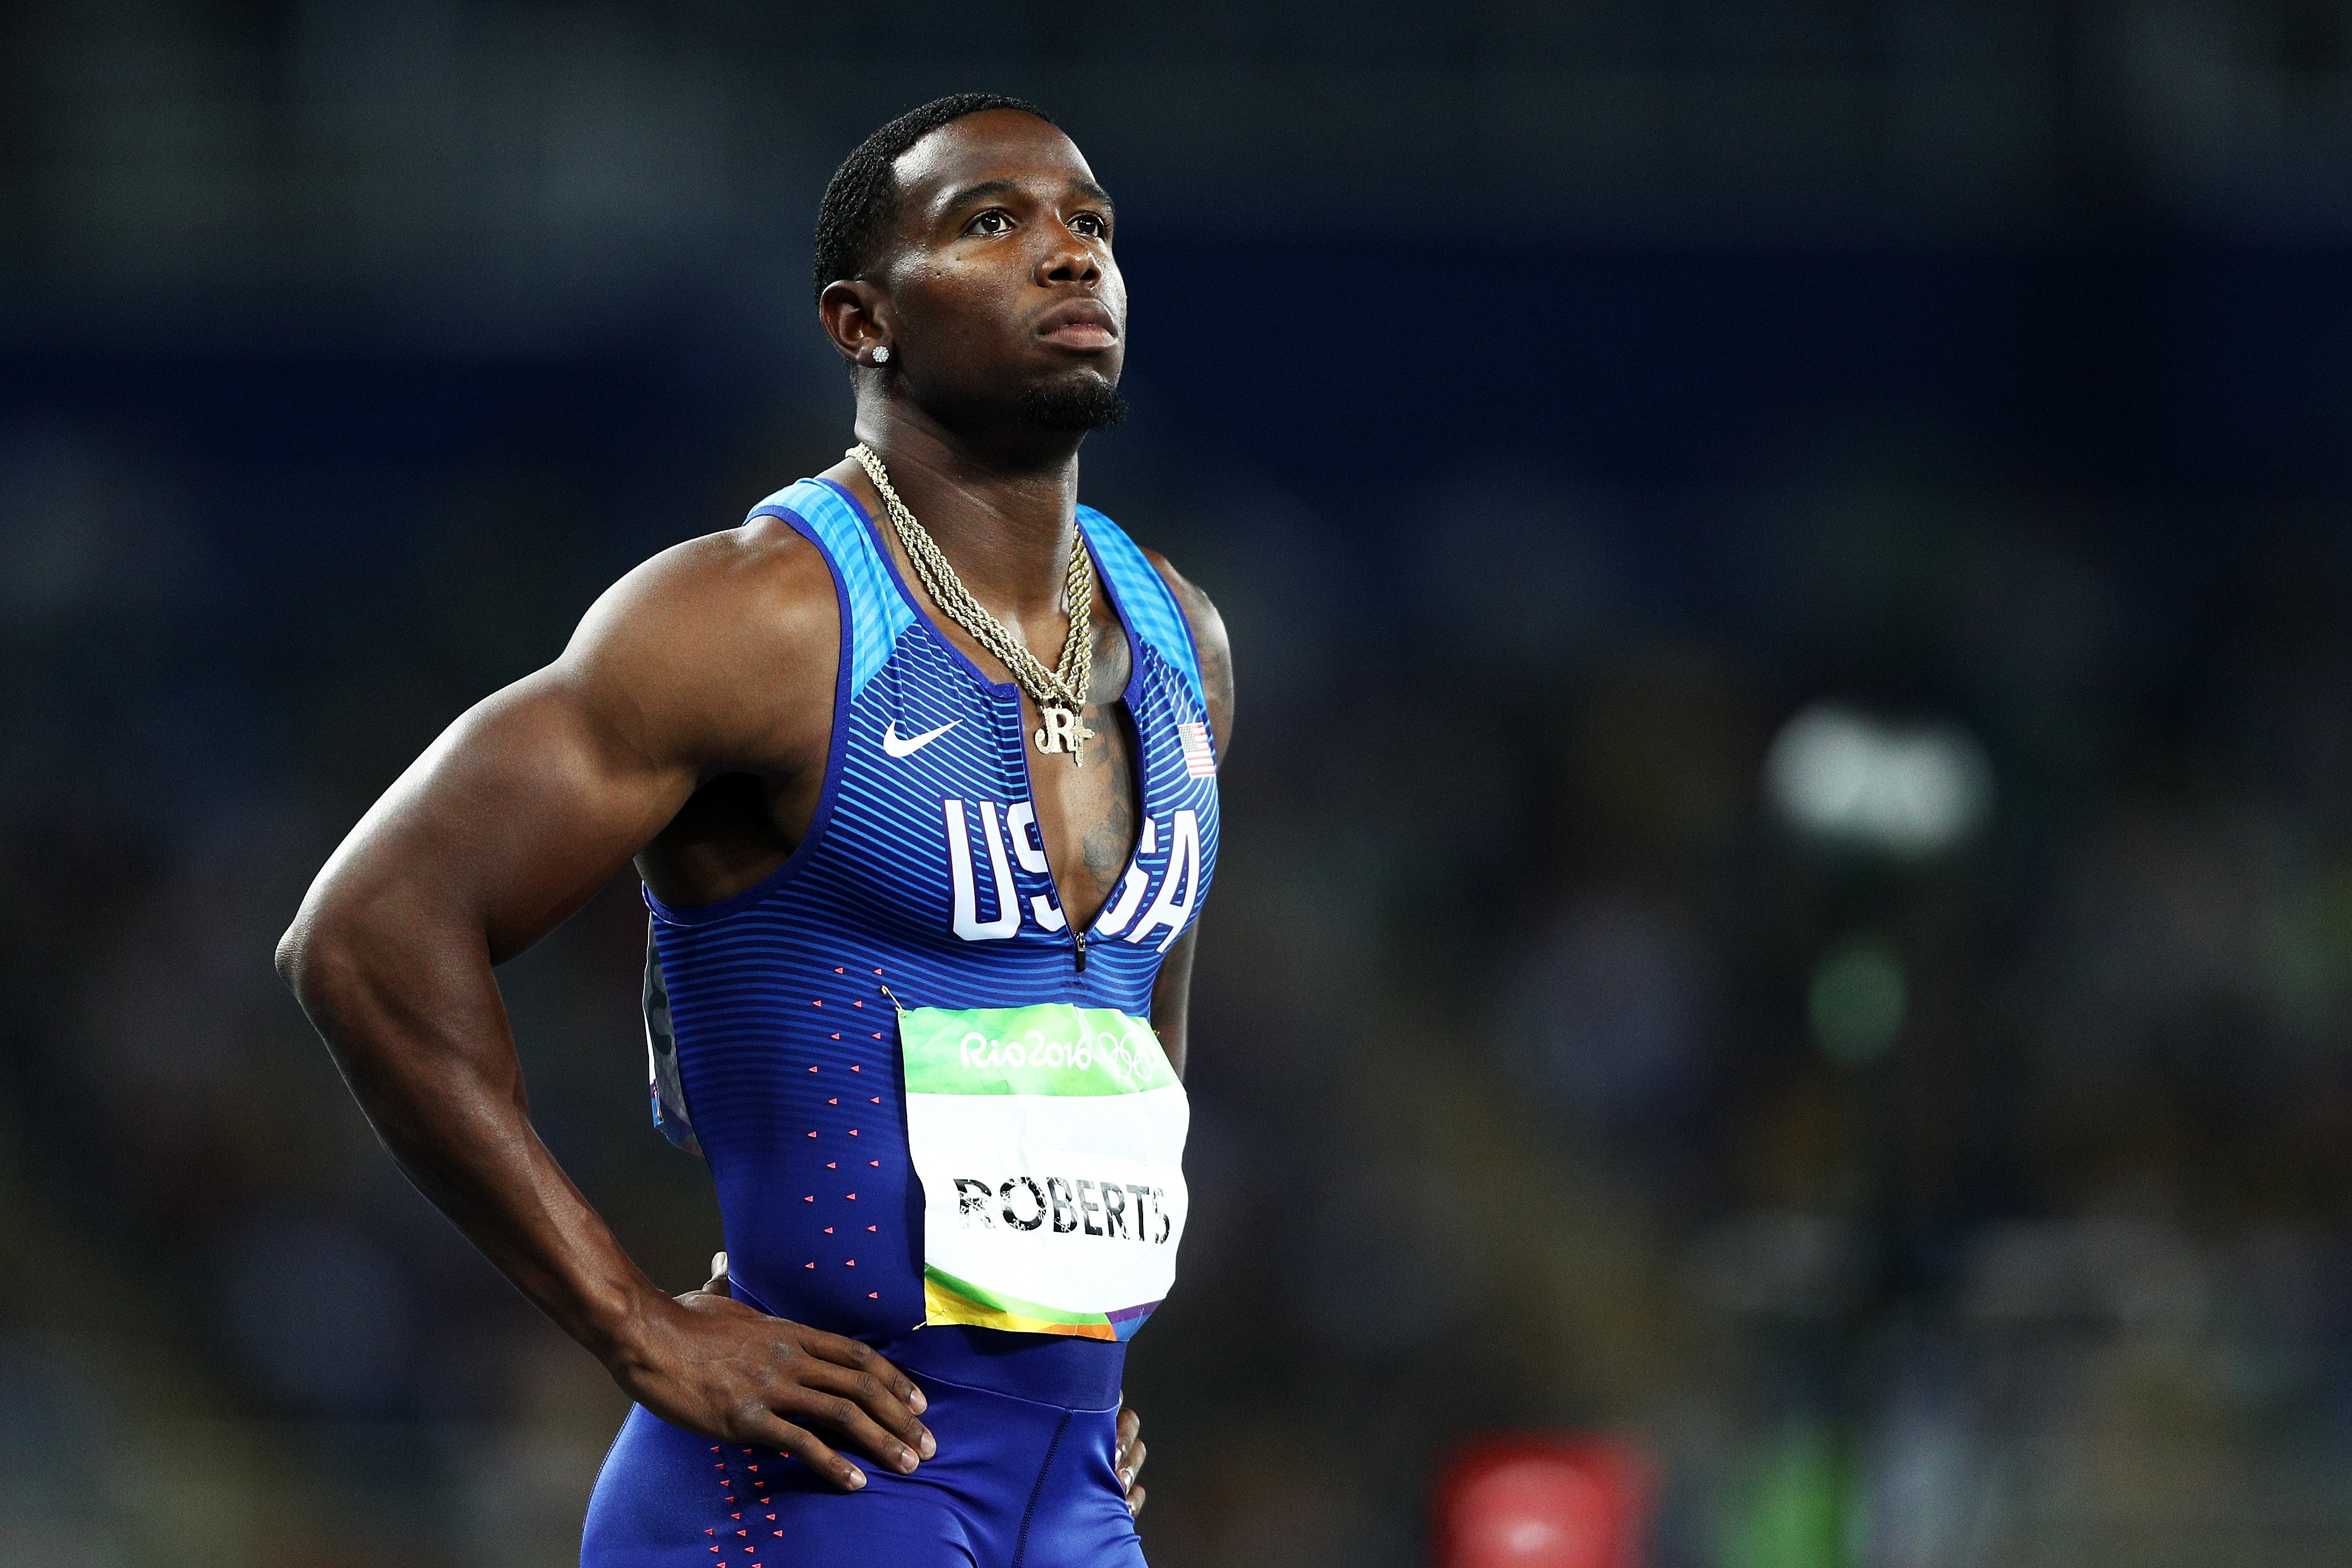 These 2016 Olympics Hunks Win Gold In Our Hearts
